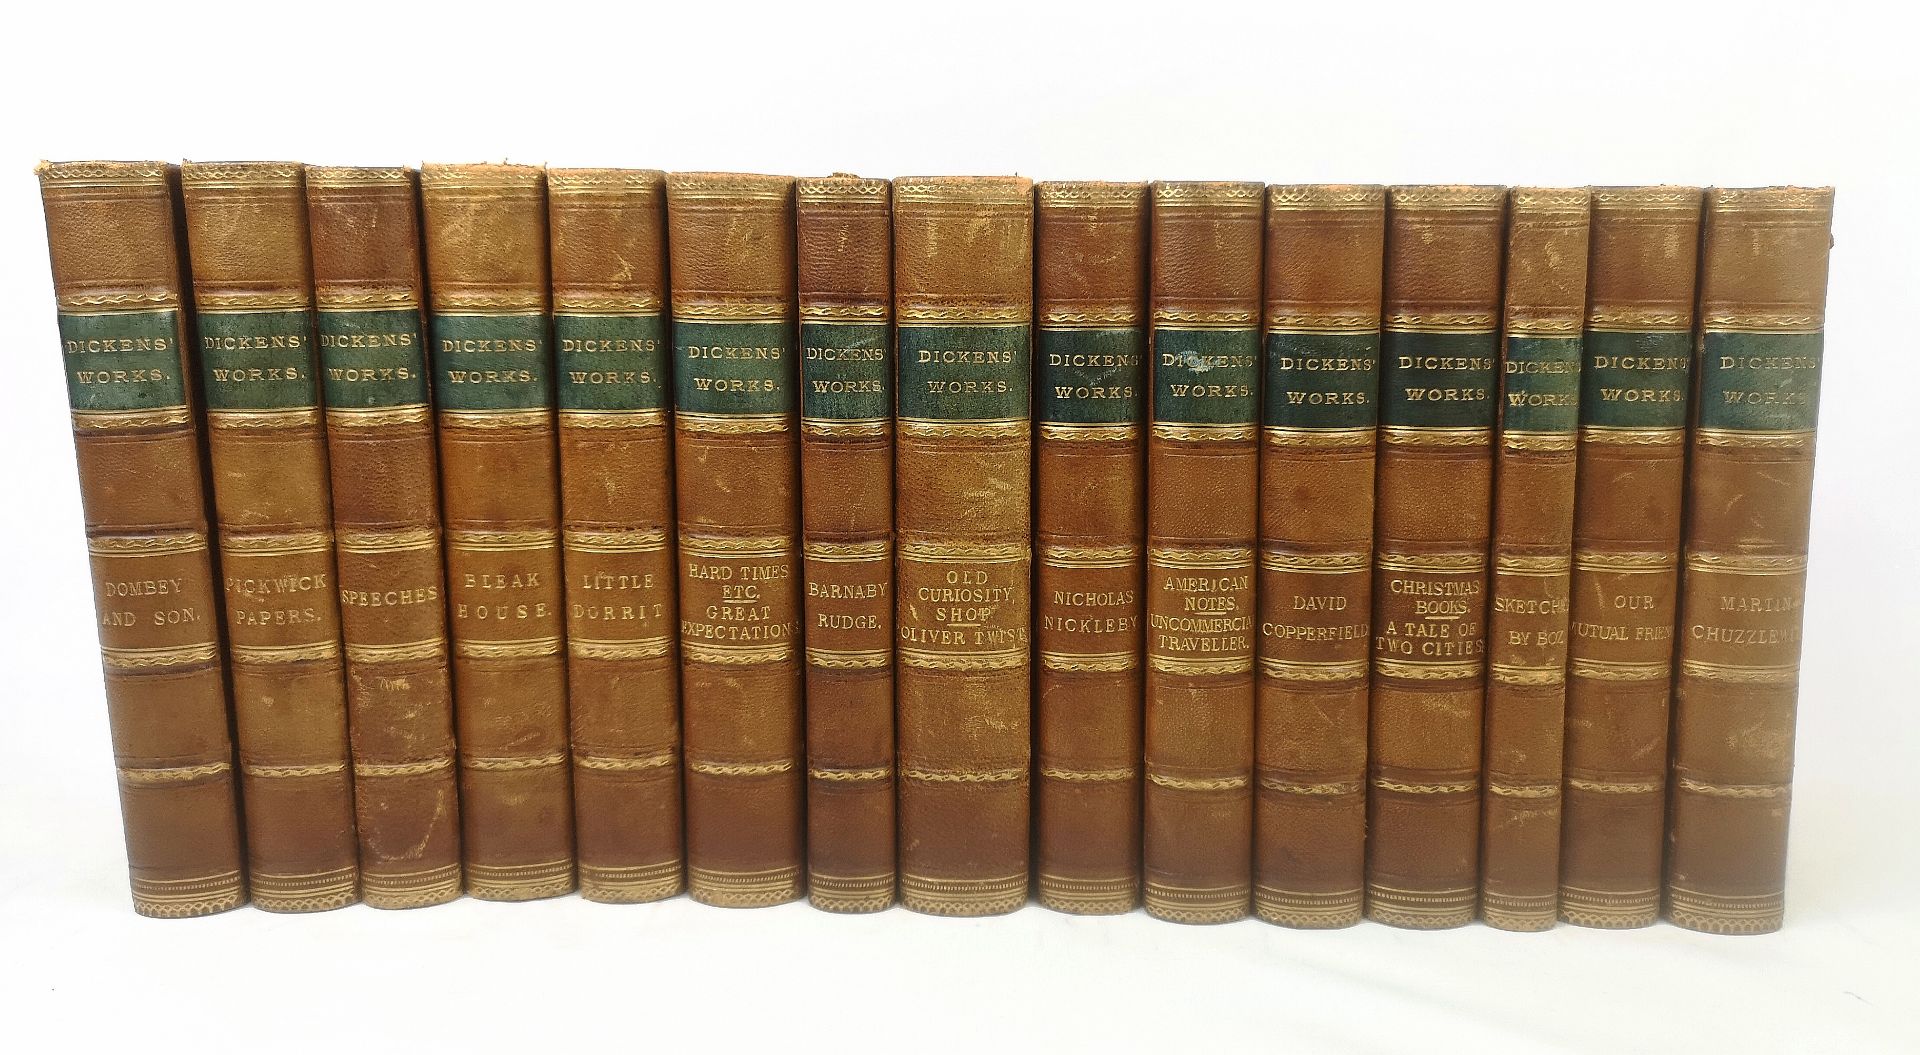 Dickens Works, fifteen half bound volumes by Charles Dickens